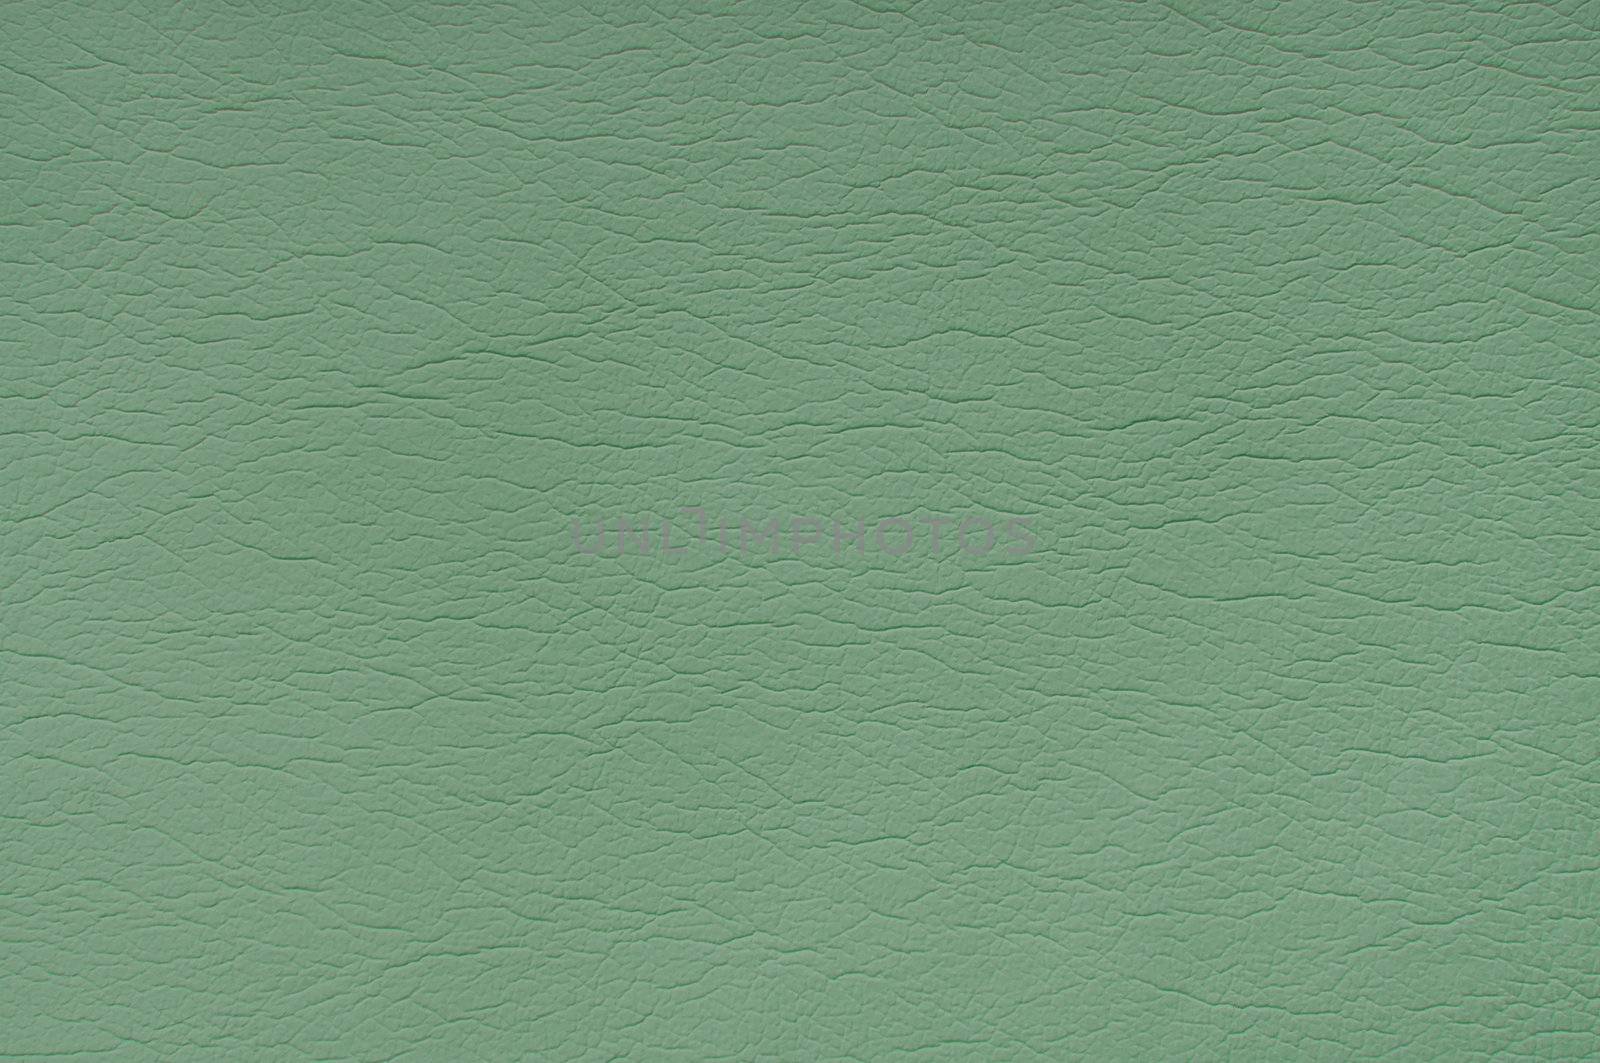 Green leather background by zeffss